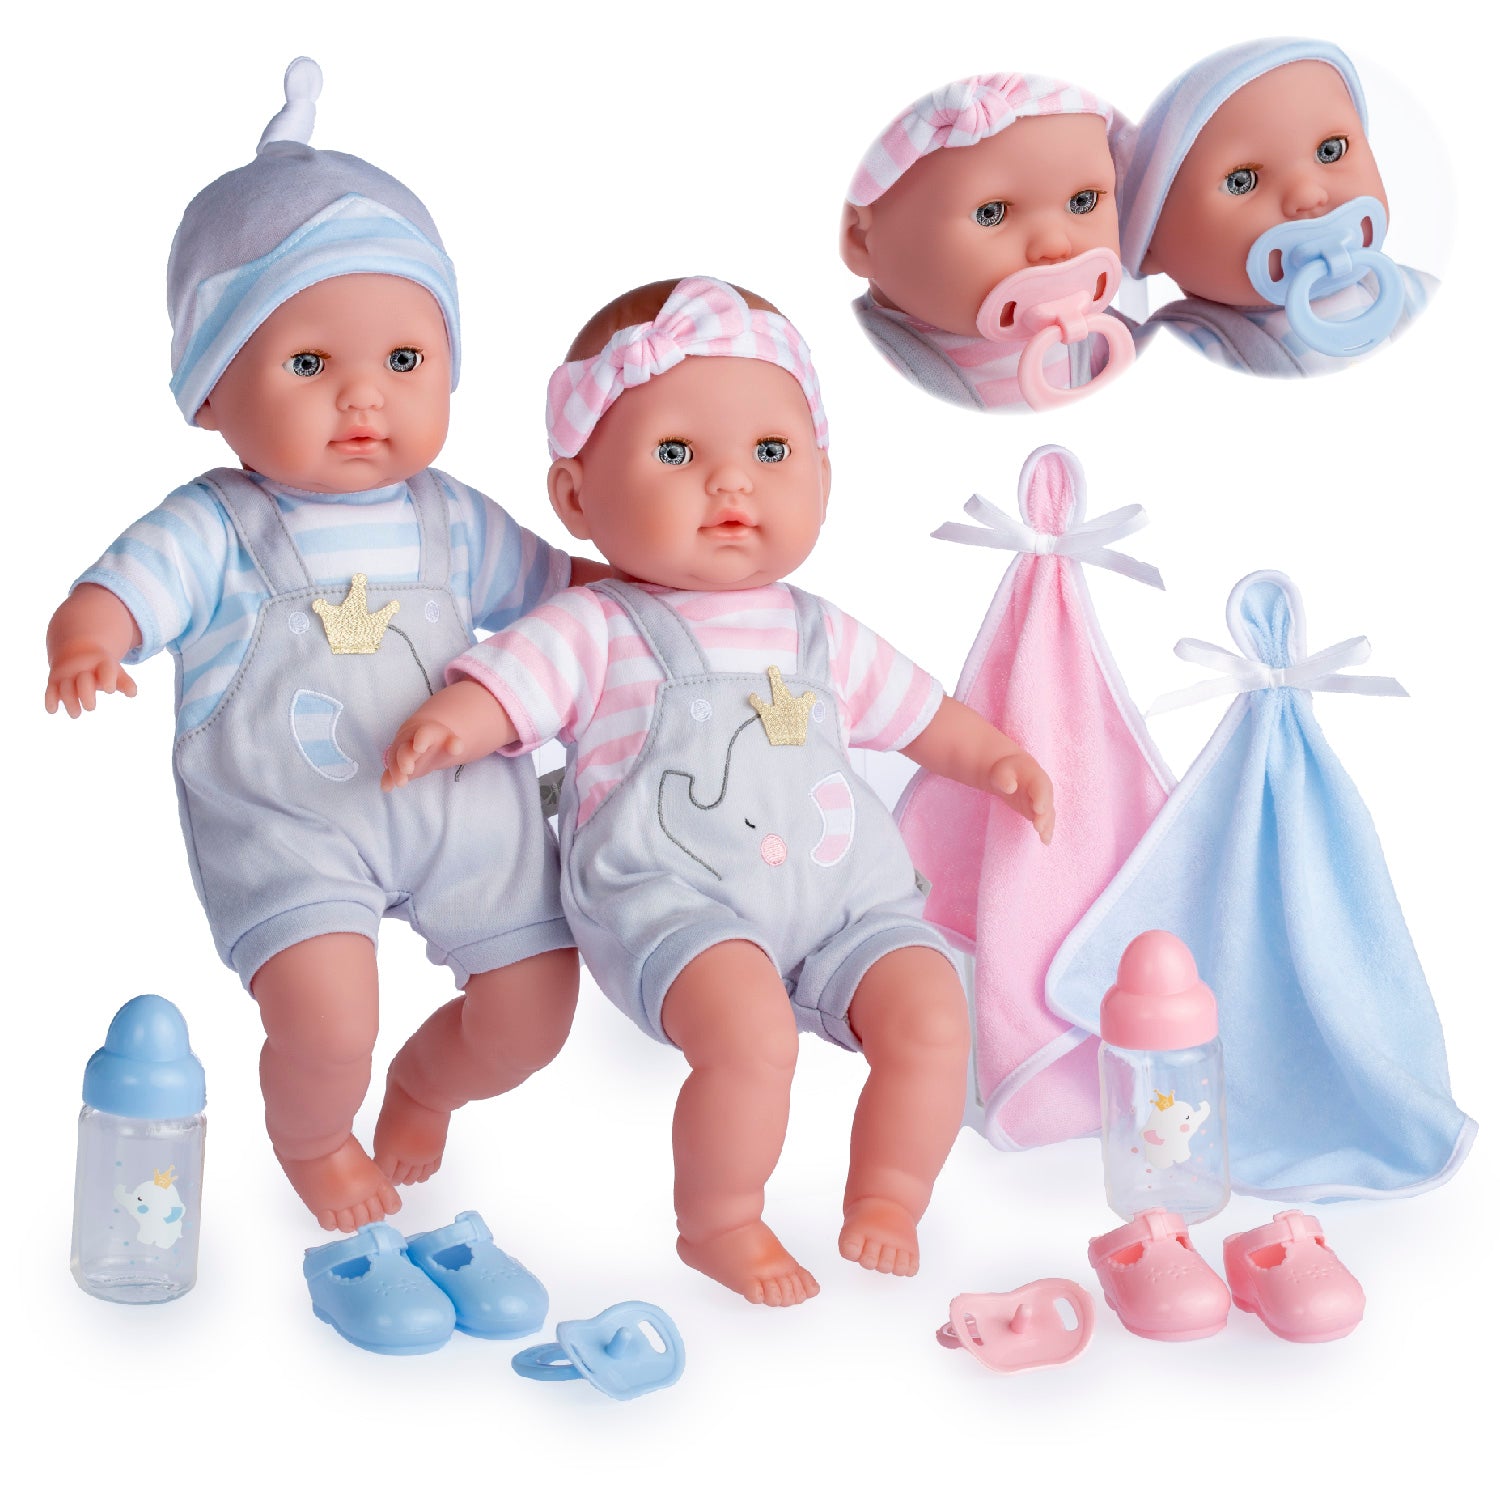 JC Toys 15" Twin Baby Dolls Life Like Real Adorable Boy Girl Gift Dolls For Kids 